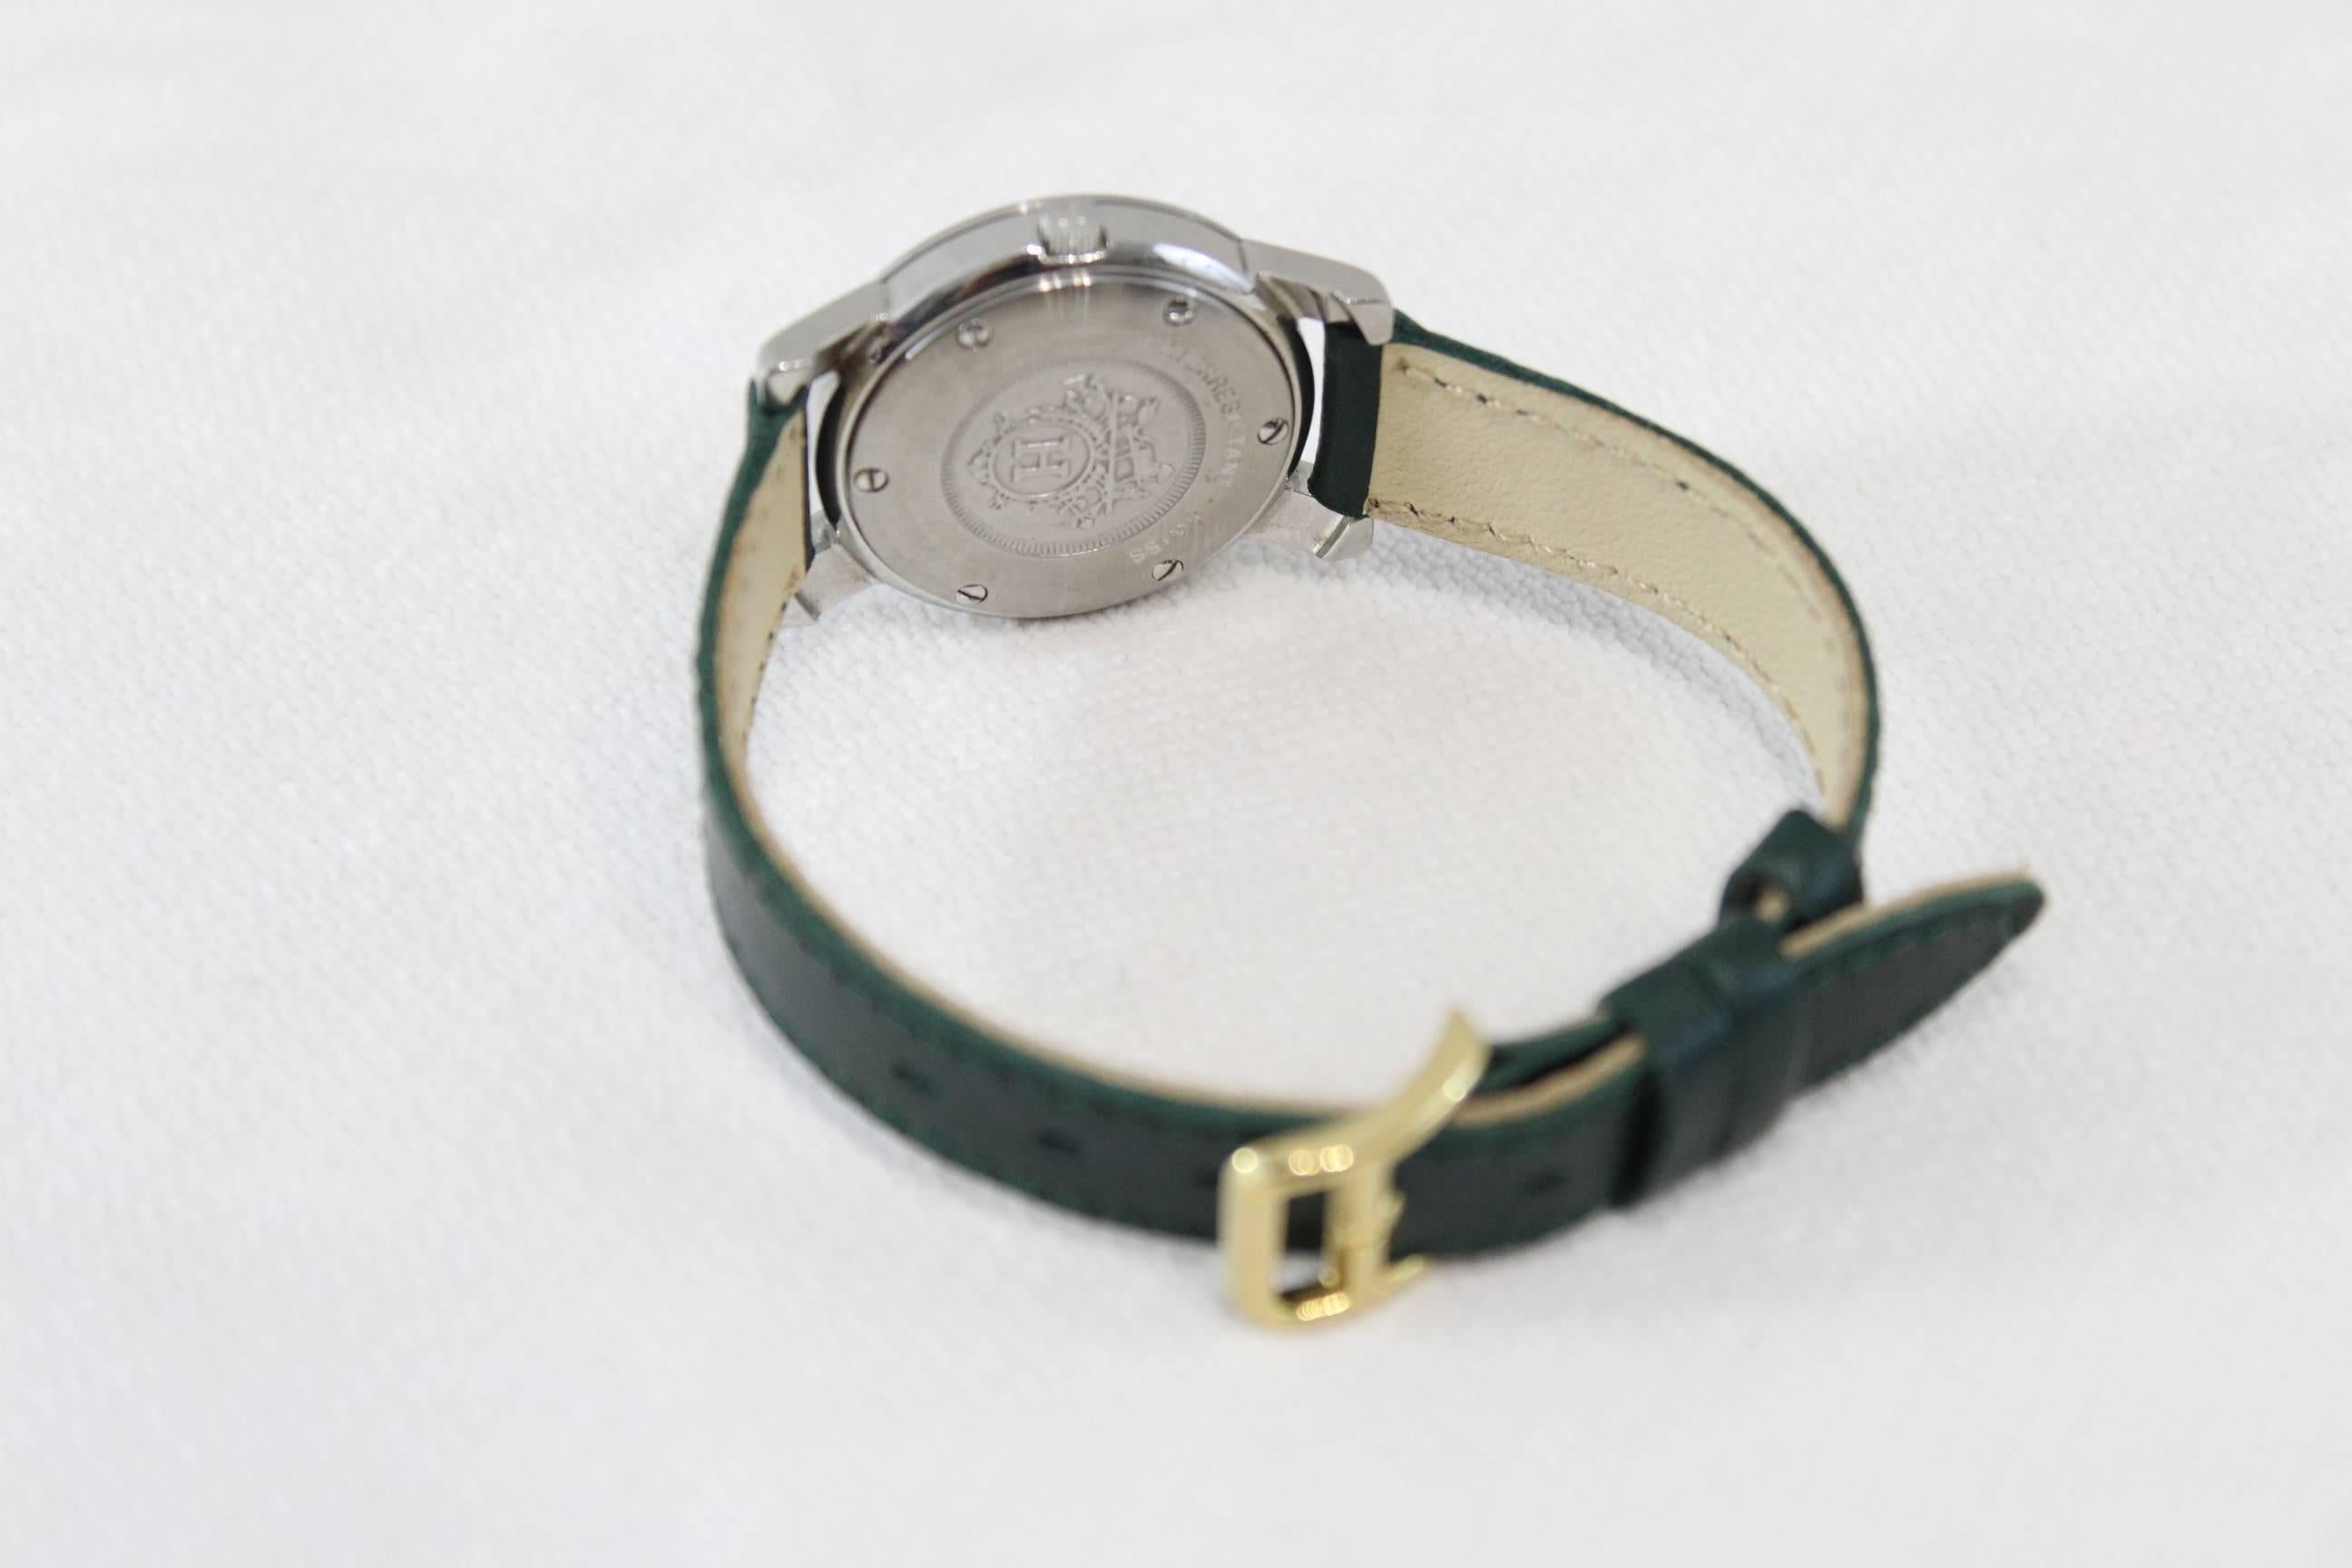 Really nice Vintage Hermes Carrick Quartz Watch.

Really good condition, some small signs of wear.

Band not from hermes, just generic leather band.

Buckle Hermes